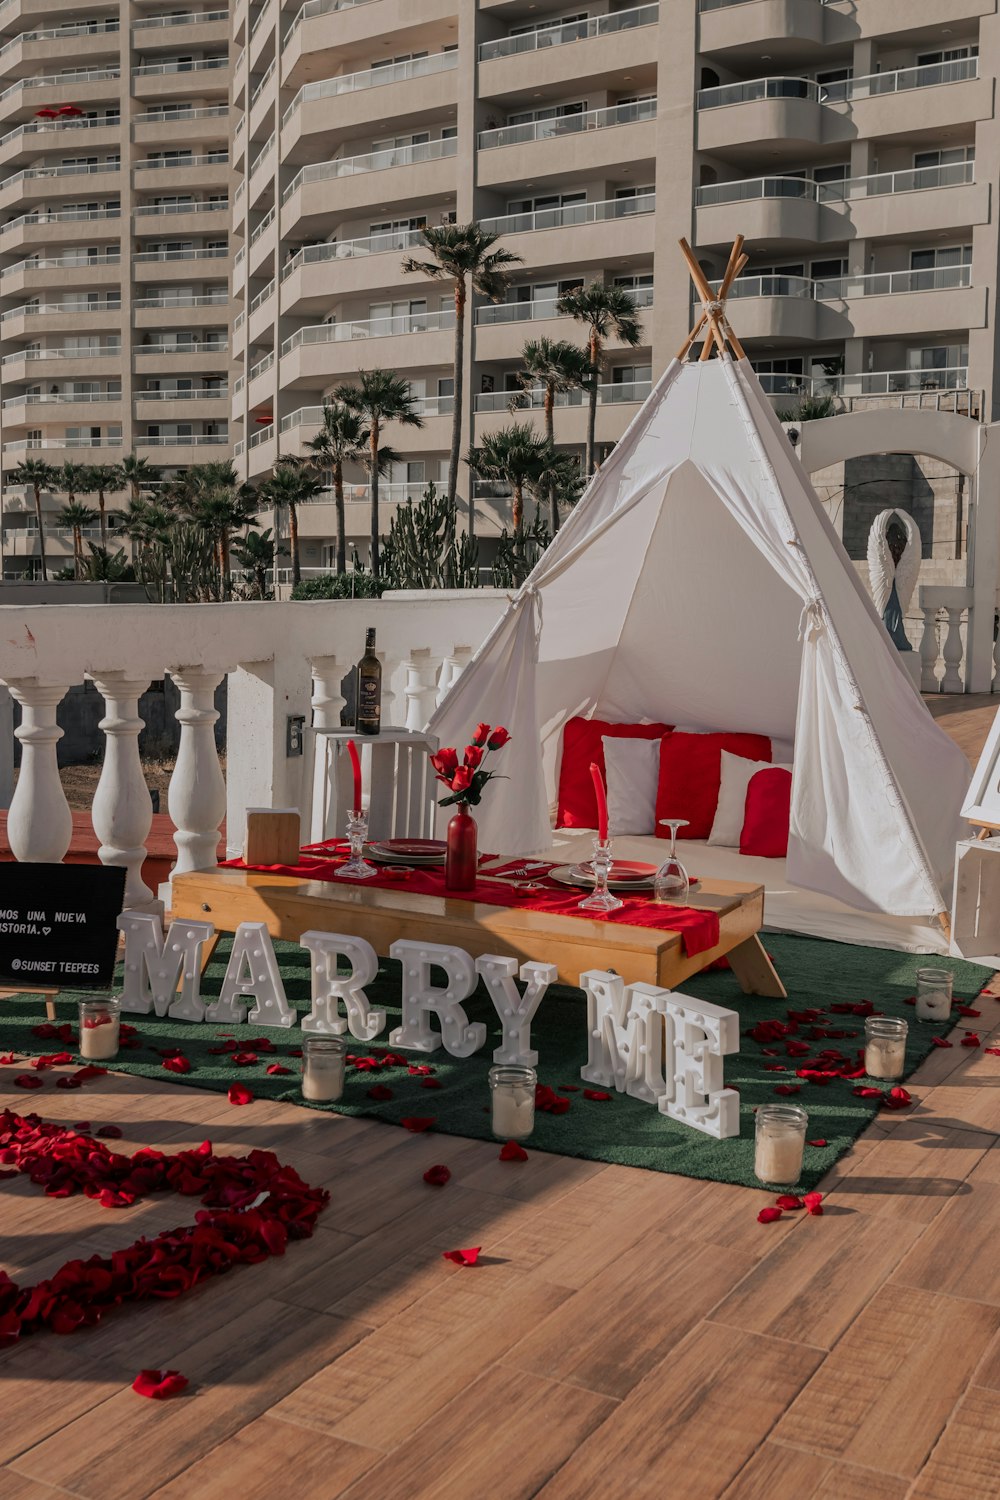 a tent set up for a party with red rose petals on the ground